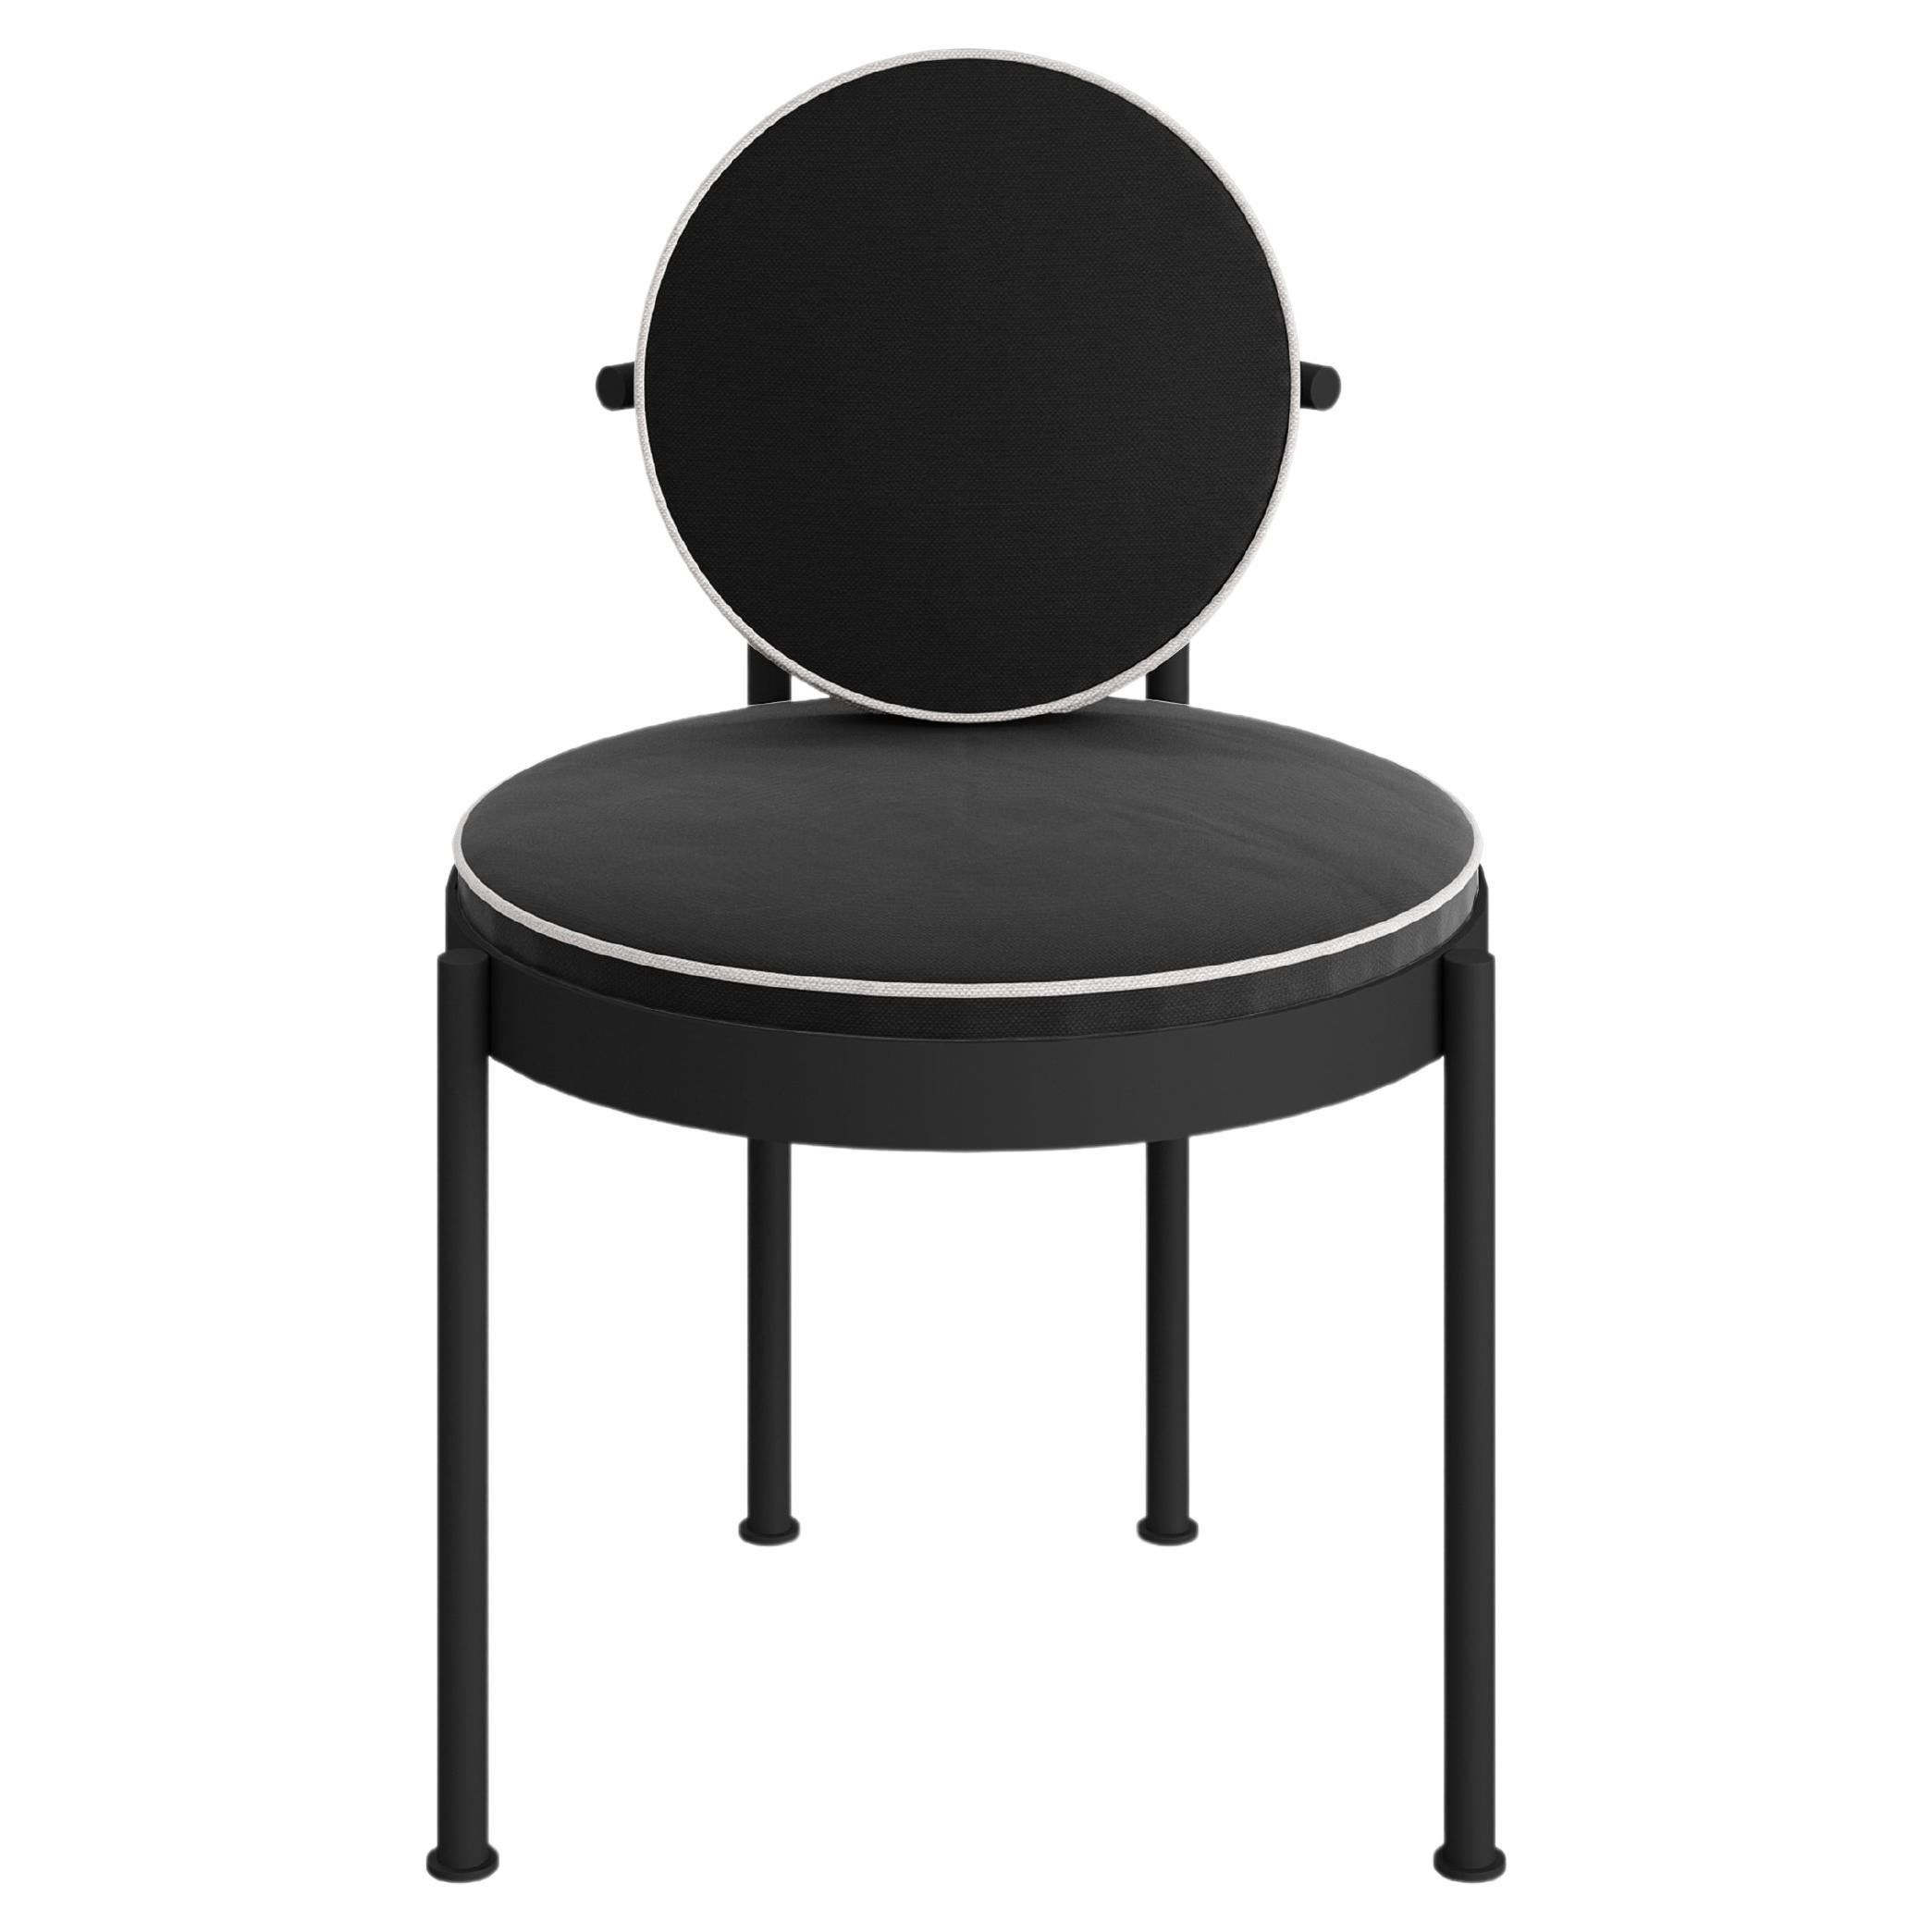 Outdoor Dining Chair in Black Stainless Steel with Black Water-Resistant Fabric